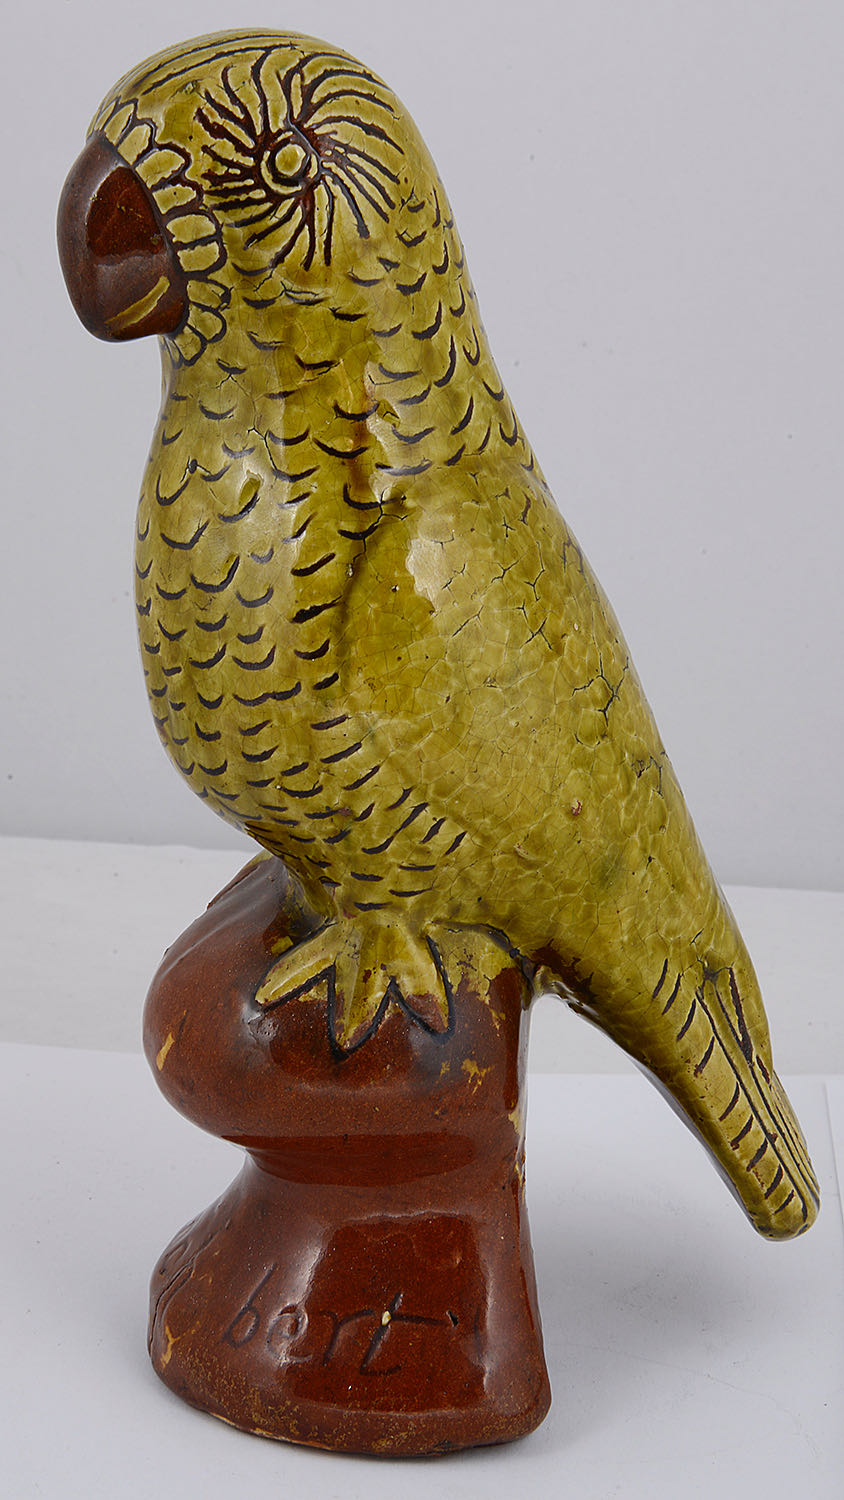 A Welsh Ewenny pottery glazed earthenware figure of a parrot - Image 2 of 2